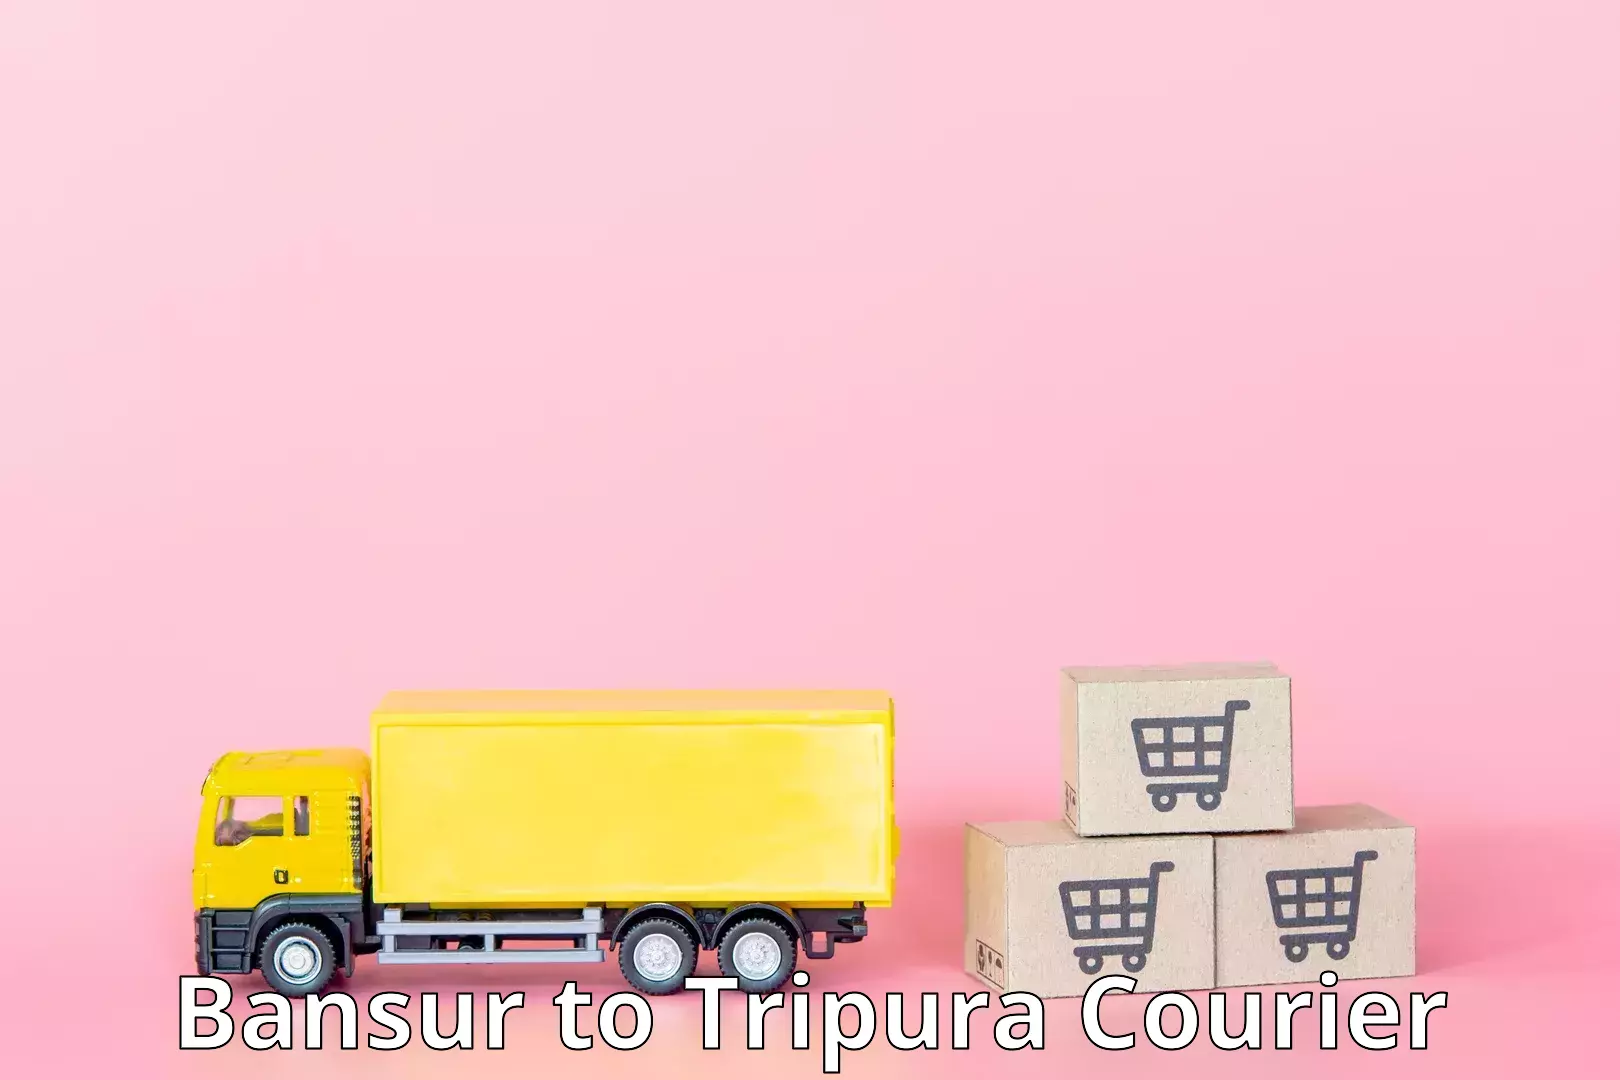 State-of-the-art courier technology Bansur to Udaipur Tripura